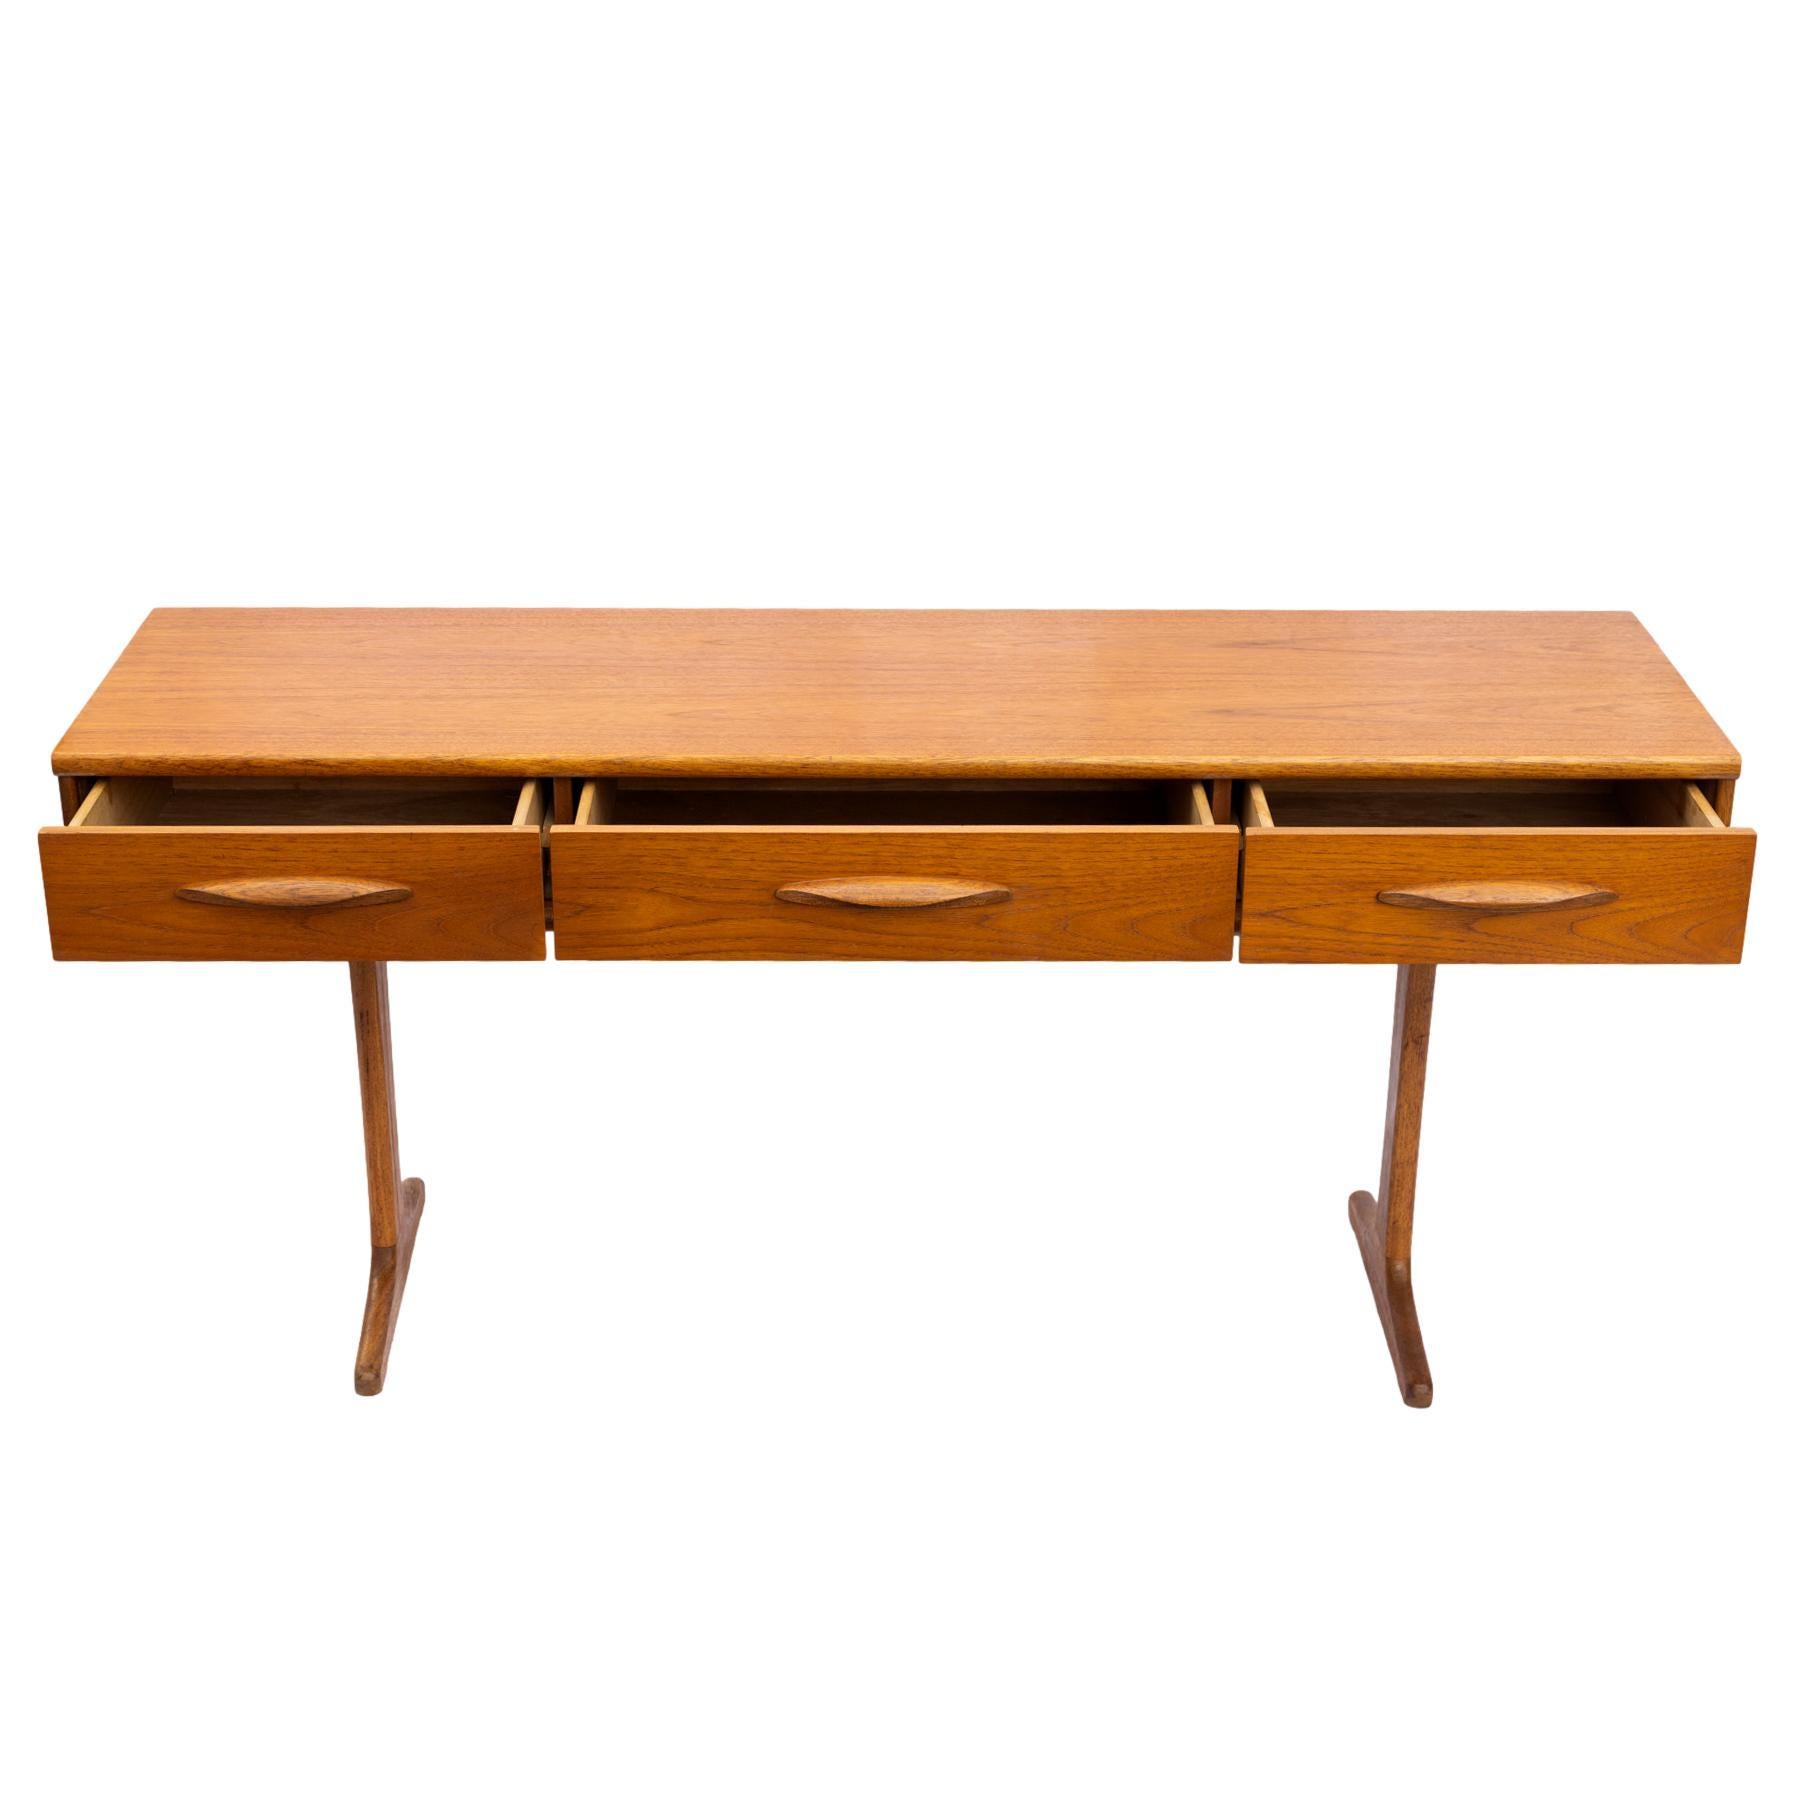 Mid-Century Modern console/sofa table Designed by Frank Guille (1926--2018) for Austinsuite, of rectangular form with three drawers, each having molded pulls, on Danish Modern legs, the center drawer with the maker's stamp, 'austinsuite, REGD